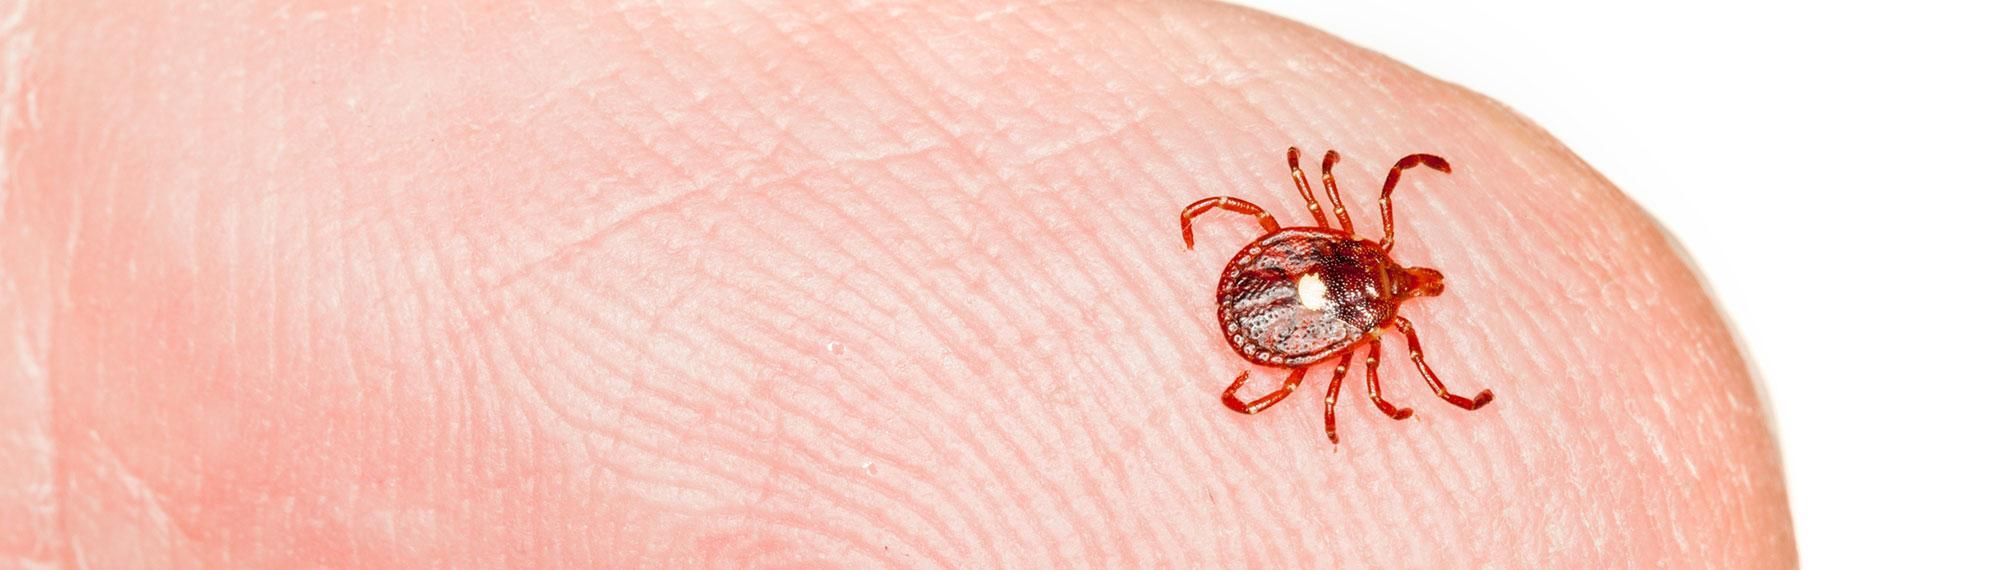 lone star tick crawling on finger